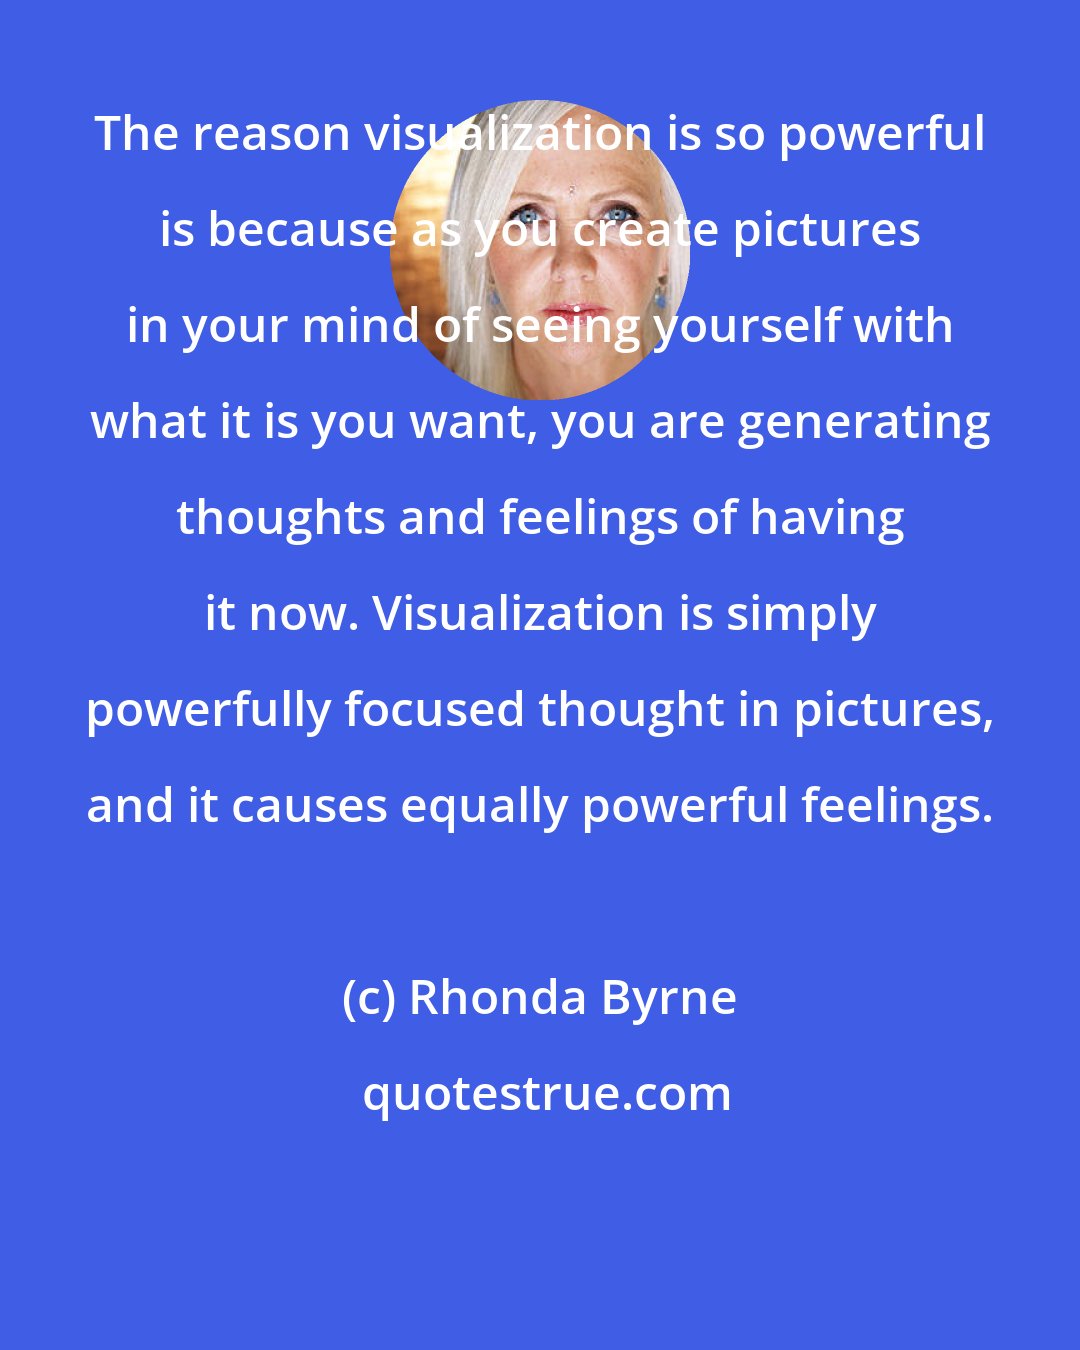 Rhonda Byrne: The reason visualization is so powerful is because as you create pictures in your mind of seeing yourself with what it is you want, you are generating thoughts and feelings of having it now. Visualization is simply powerfully focused thought in pictures, and it causes equally powerful feelings.